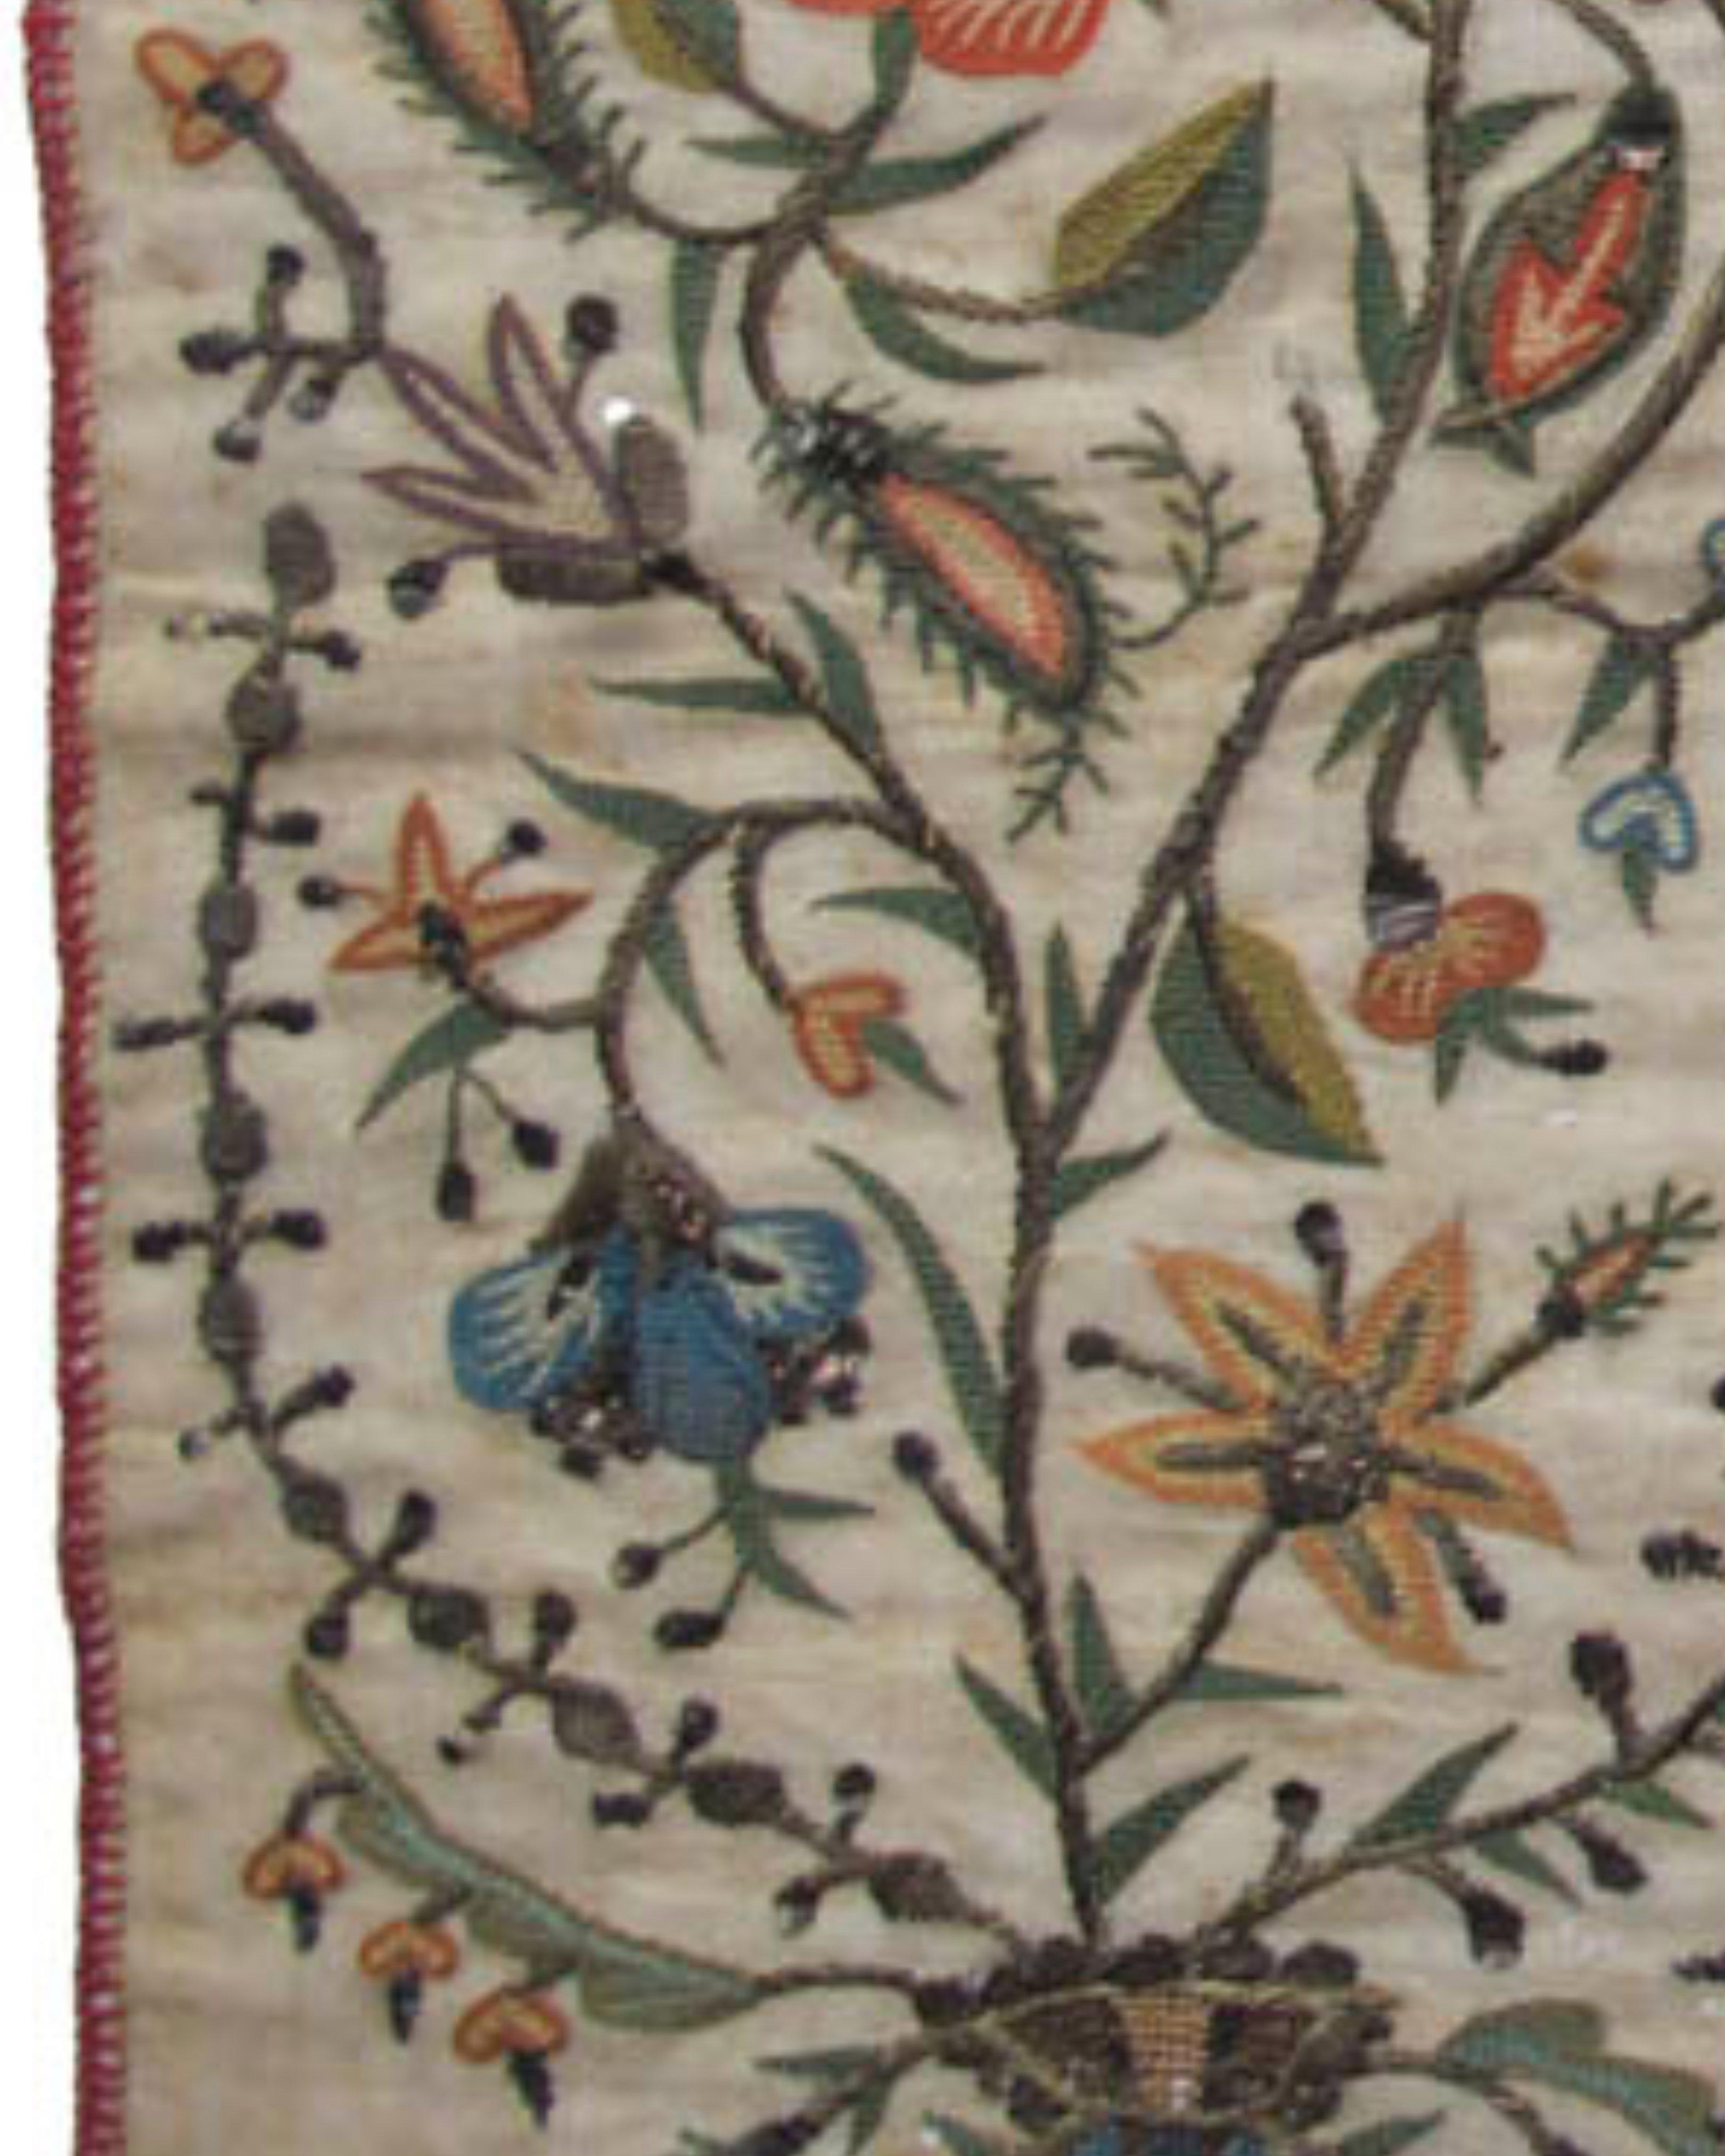 Antique Greek Pair Silk/Metal Thread Embroideries, 18th Century

Additional Information:
Dimensions: 0'11